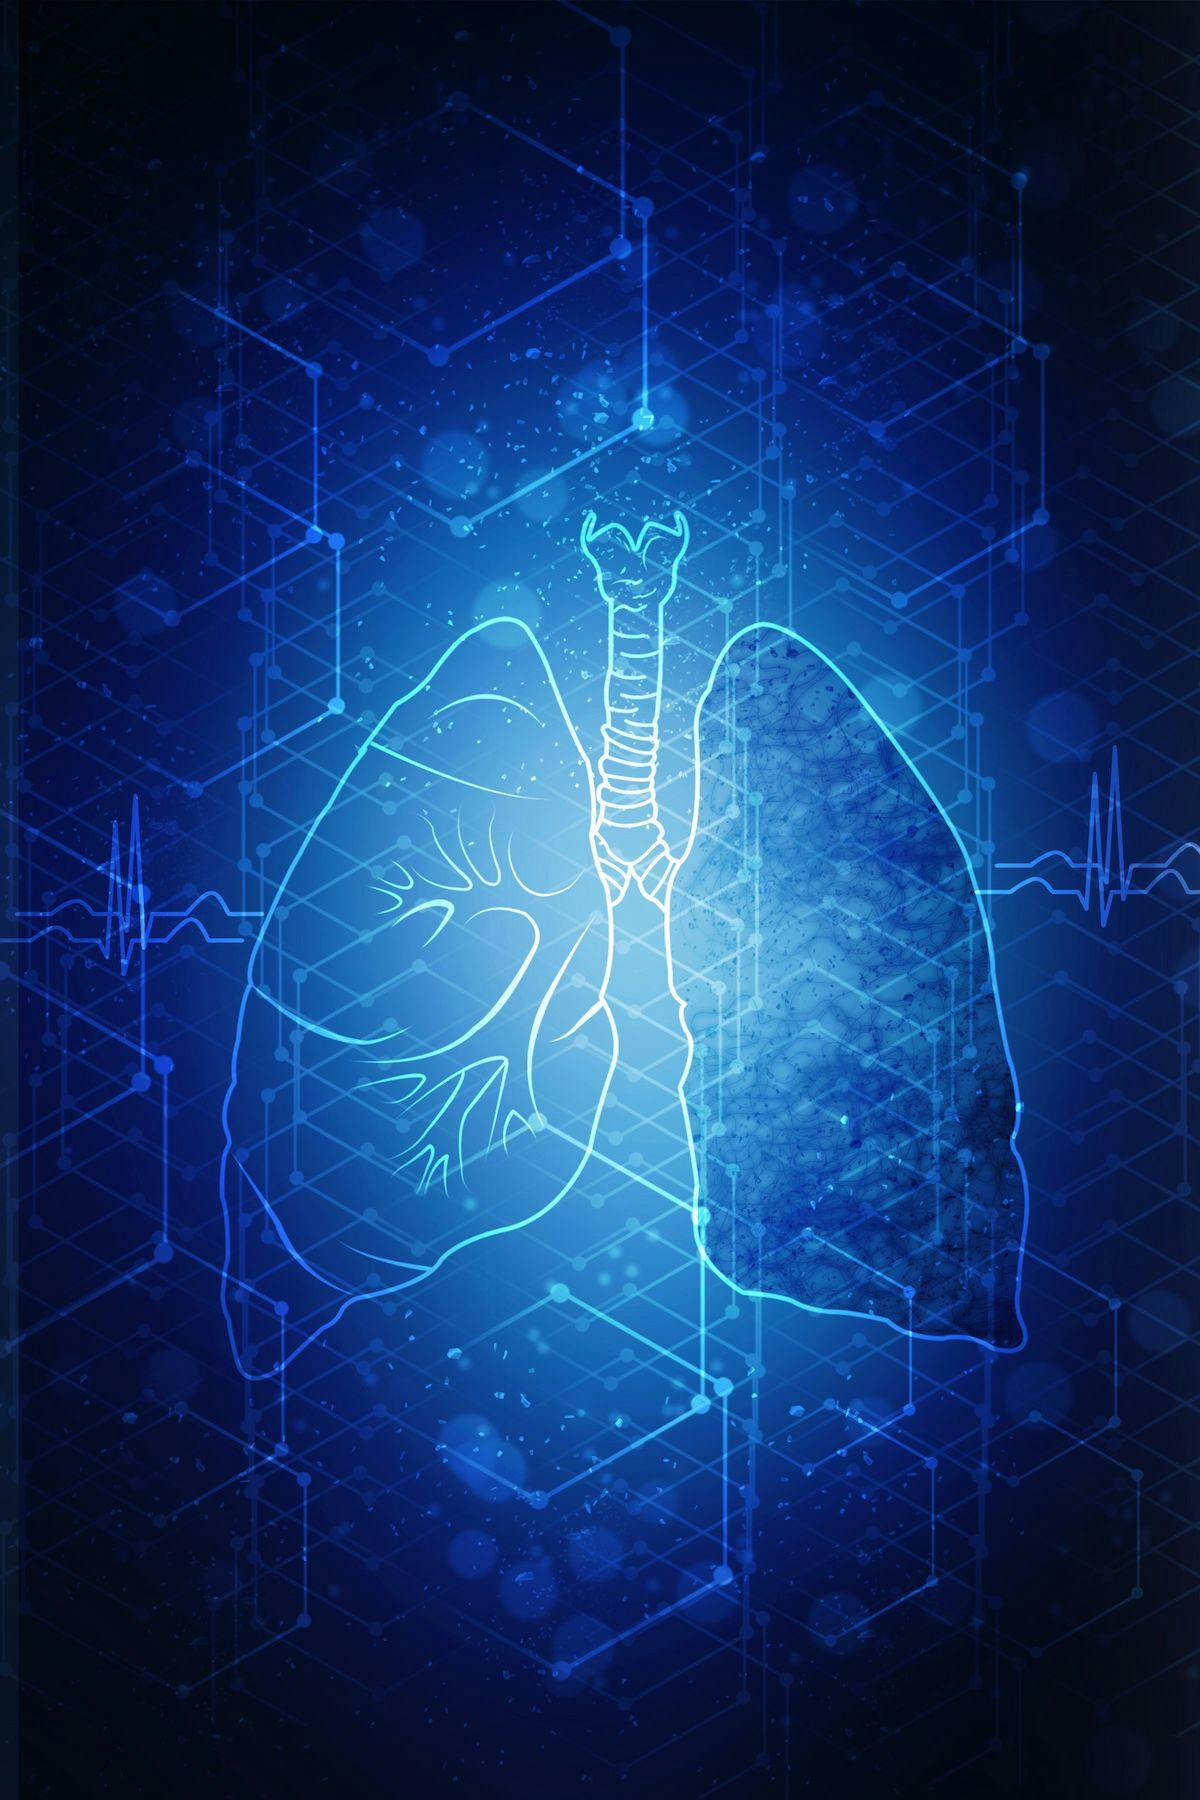 Patients with locally advanced or metastatic EGFR exon 20–mutant non–small cell lung cancer may benefit from treatment with CLN-081, which was granted breakthrough therapy designation by the FDA.